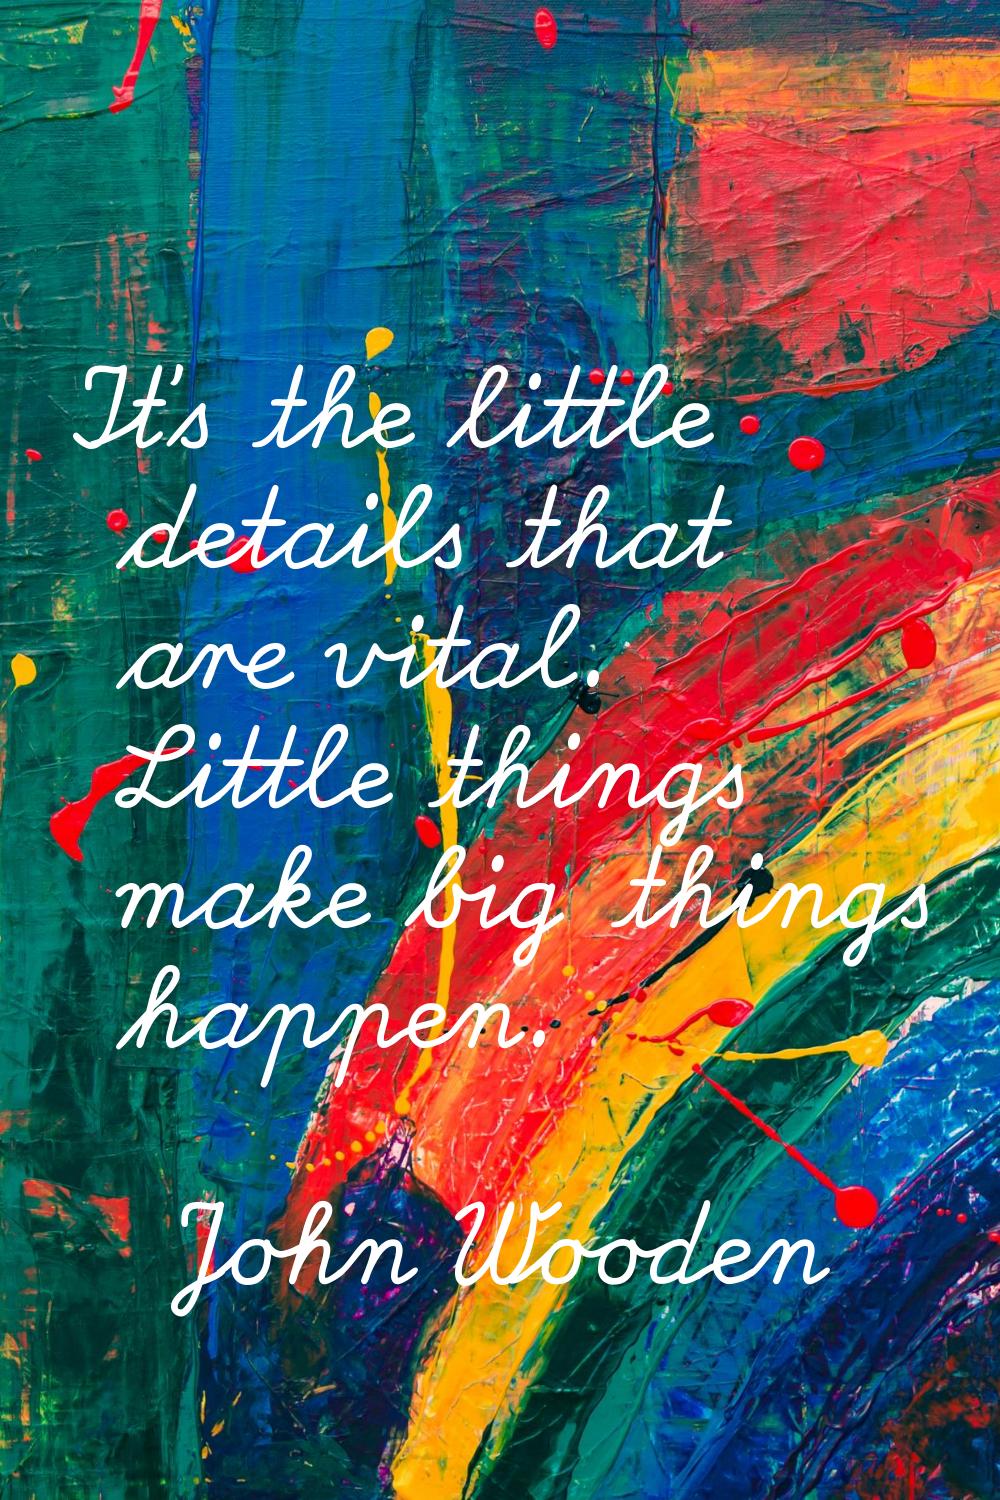 It's the little details that are vital. Little things make big things happen.